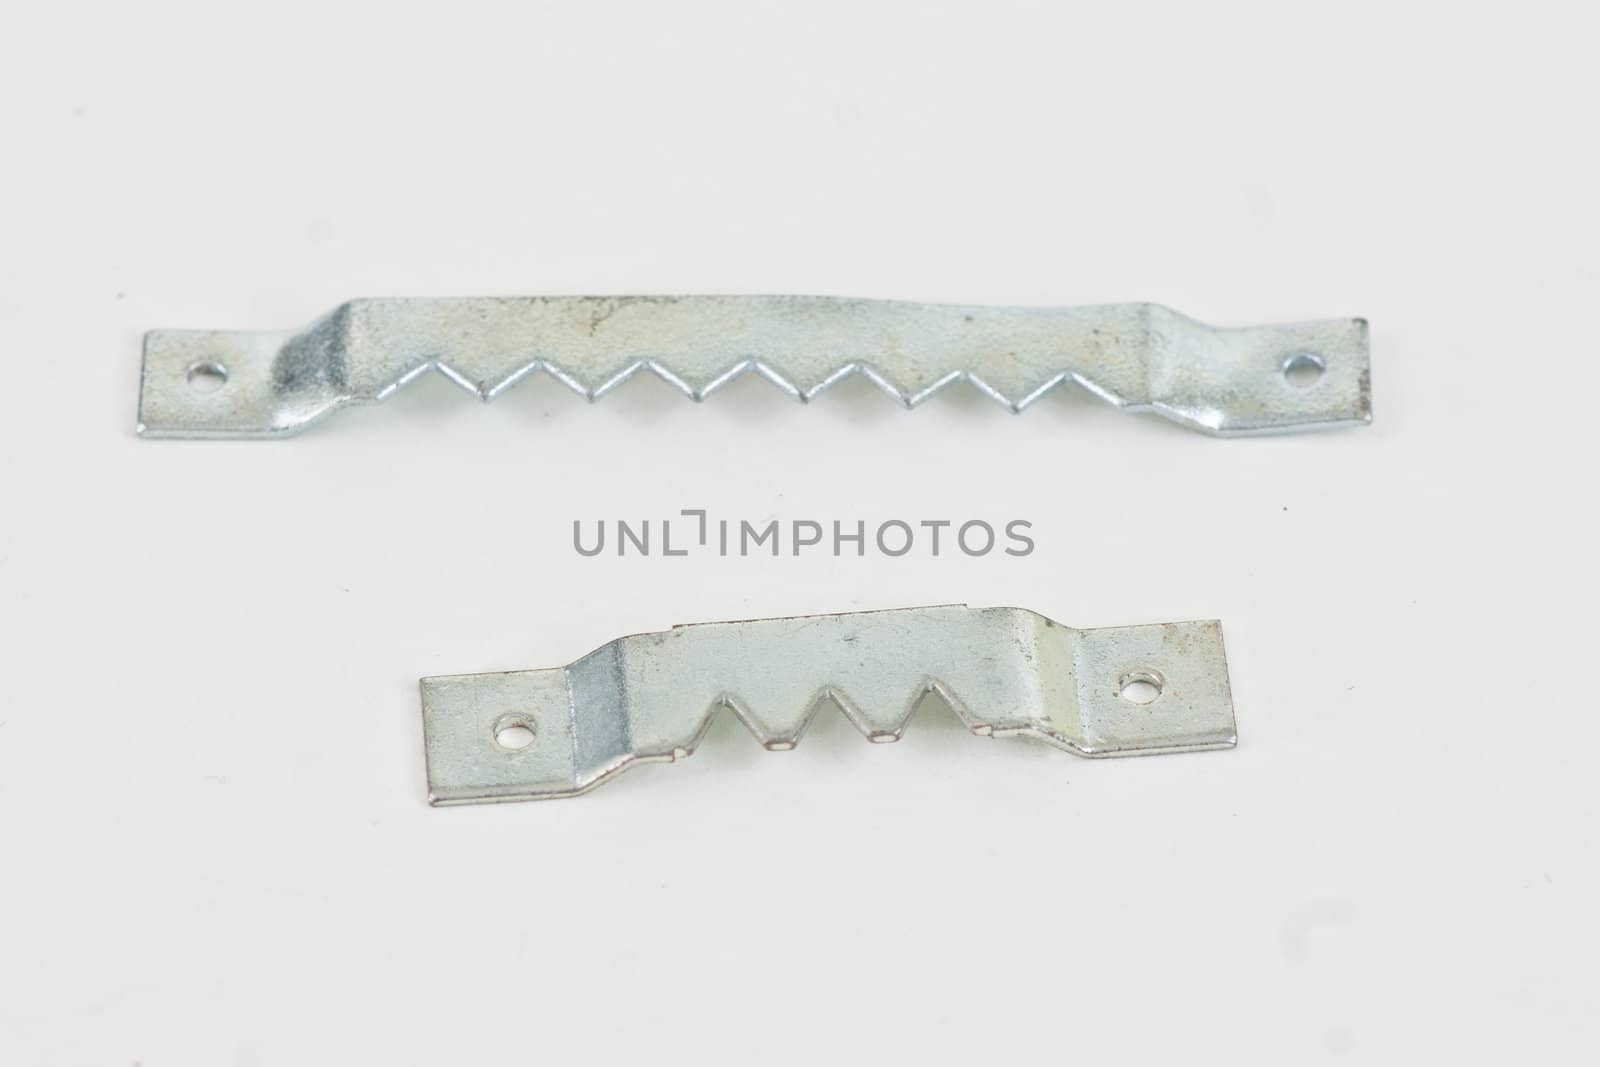 Two different sizes of saw thooth picture hangers on a white background.